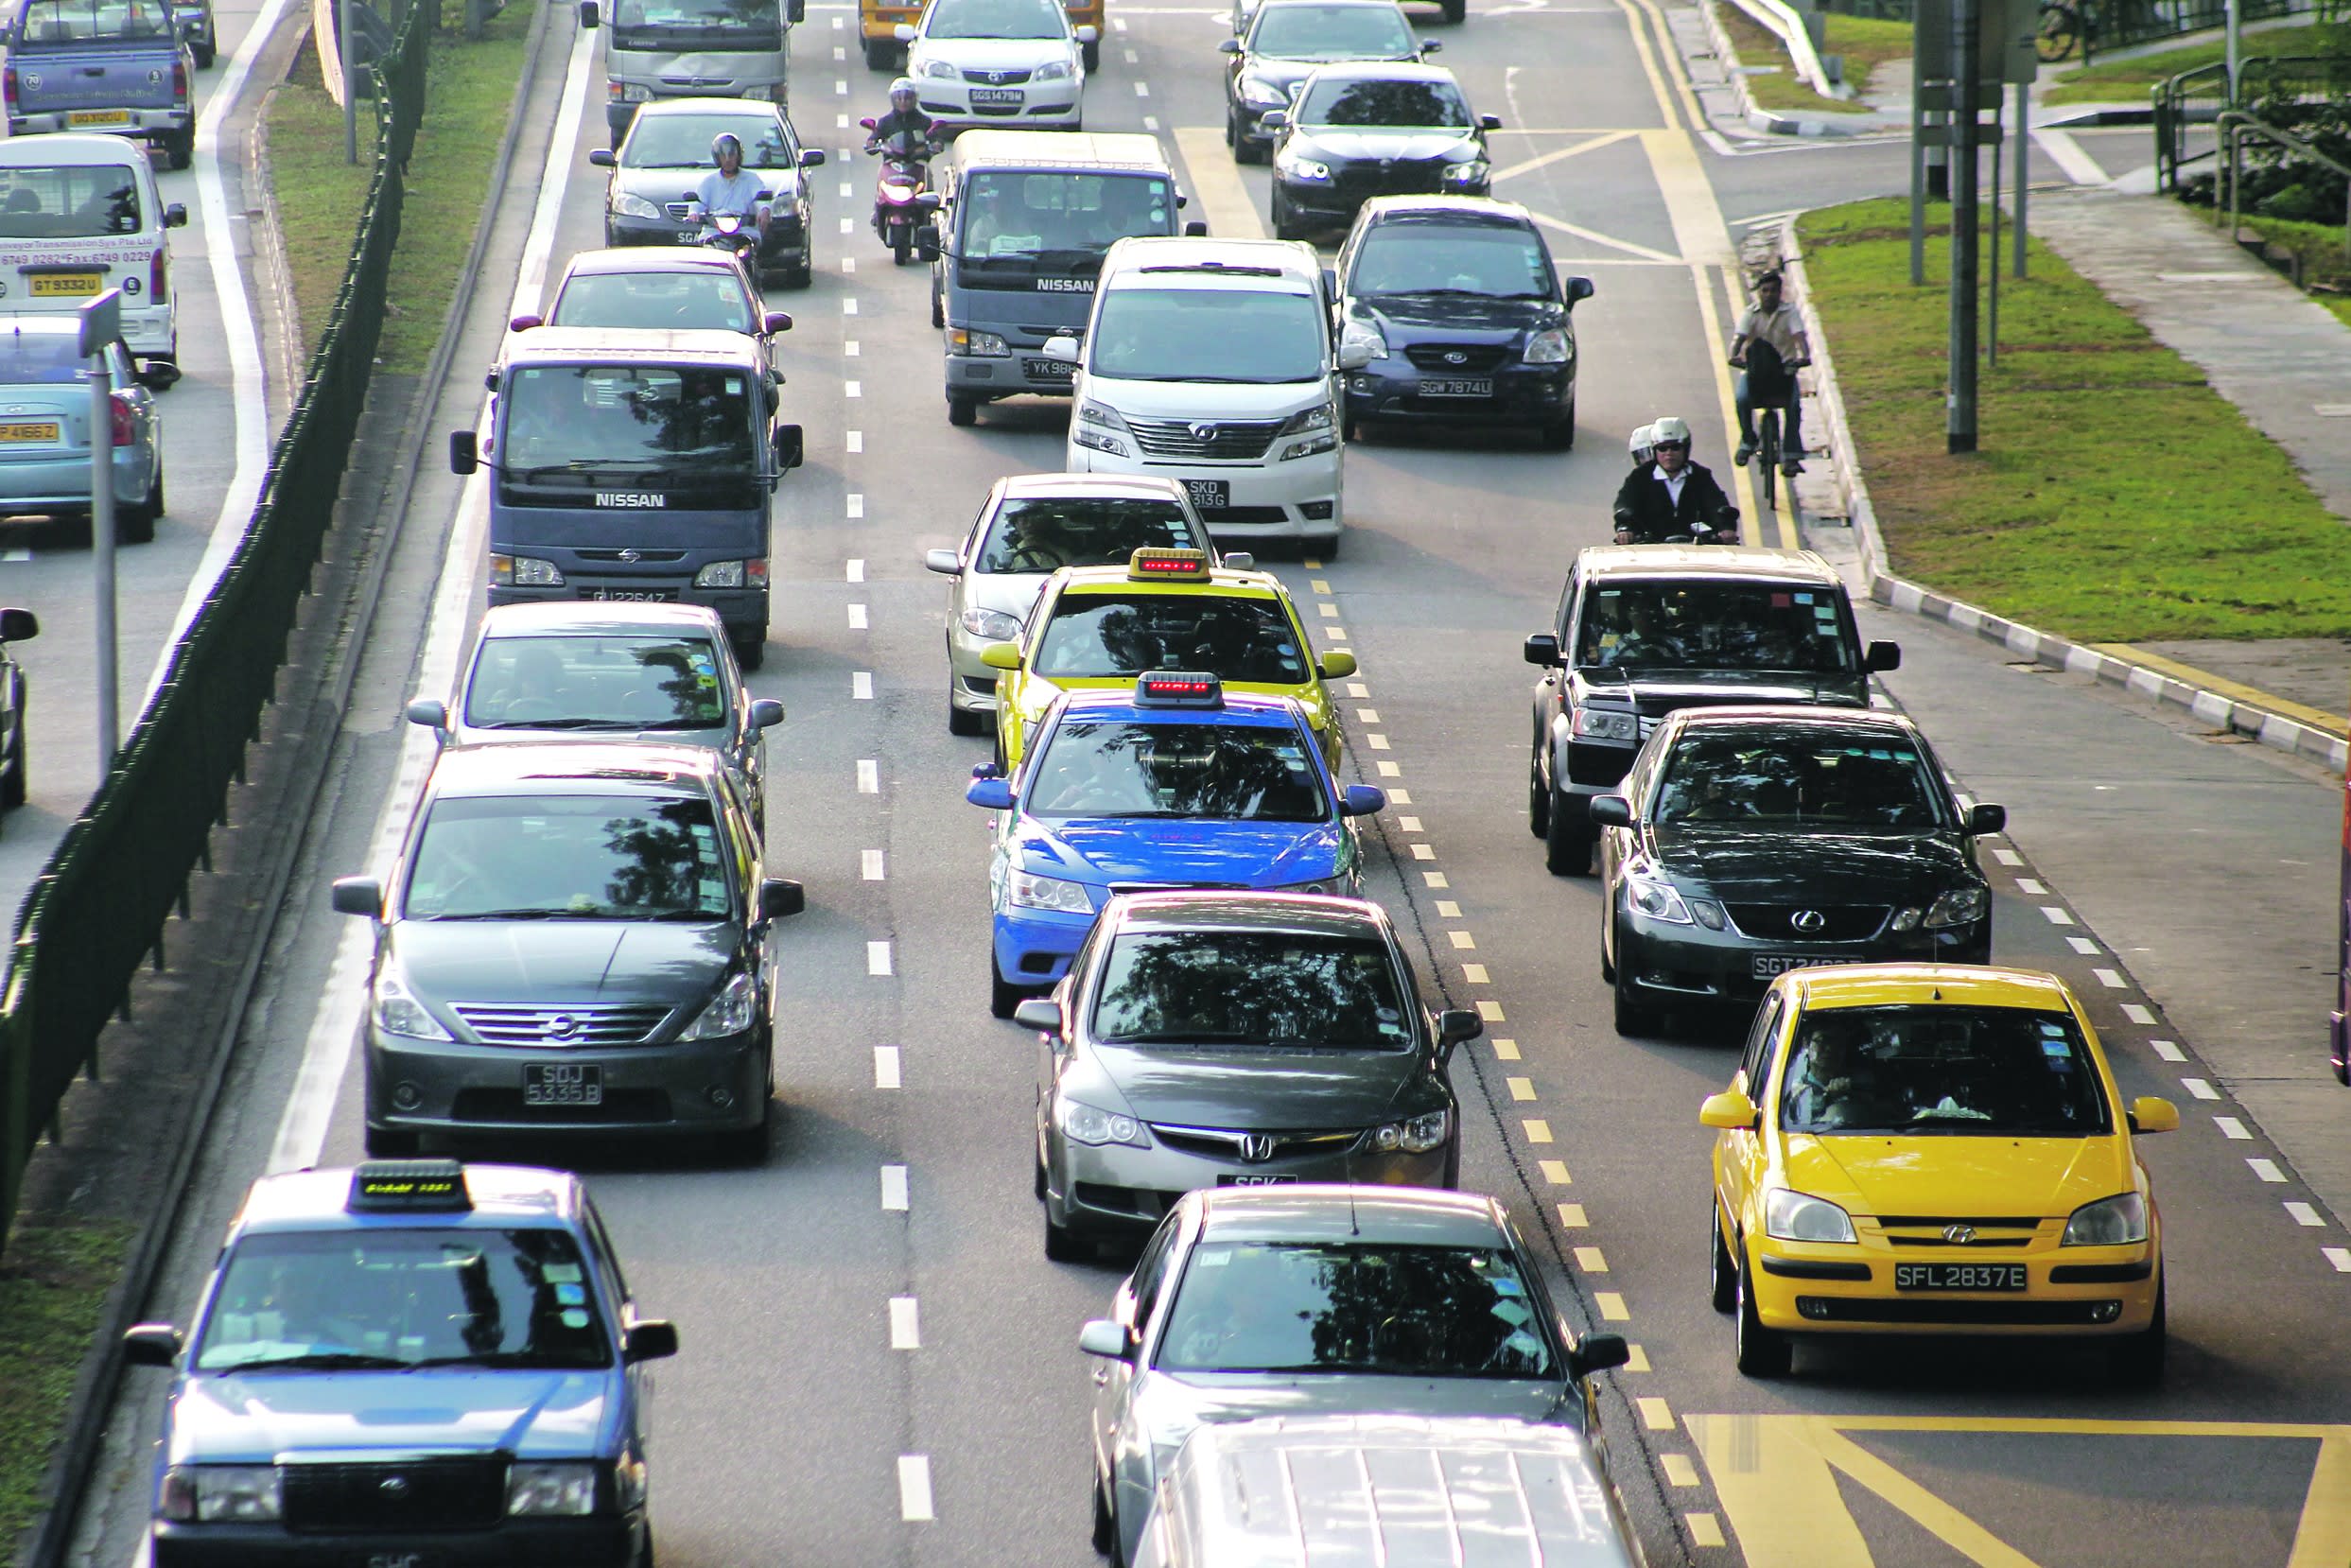 COE prices rise for all categories; premiums for large cars, open category remain above S$100,000